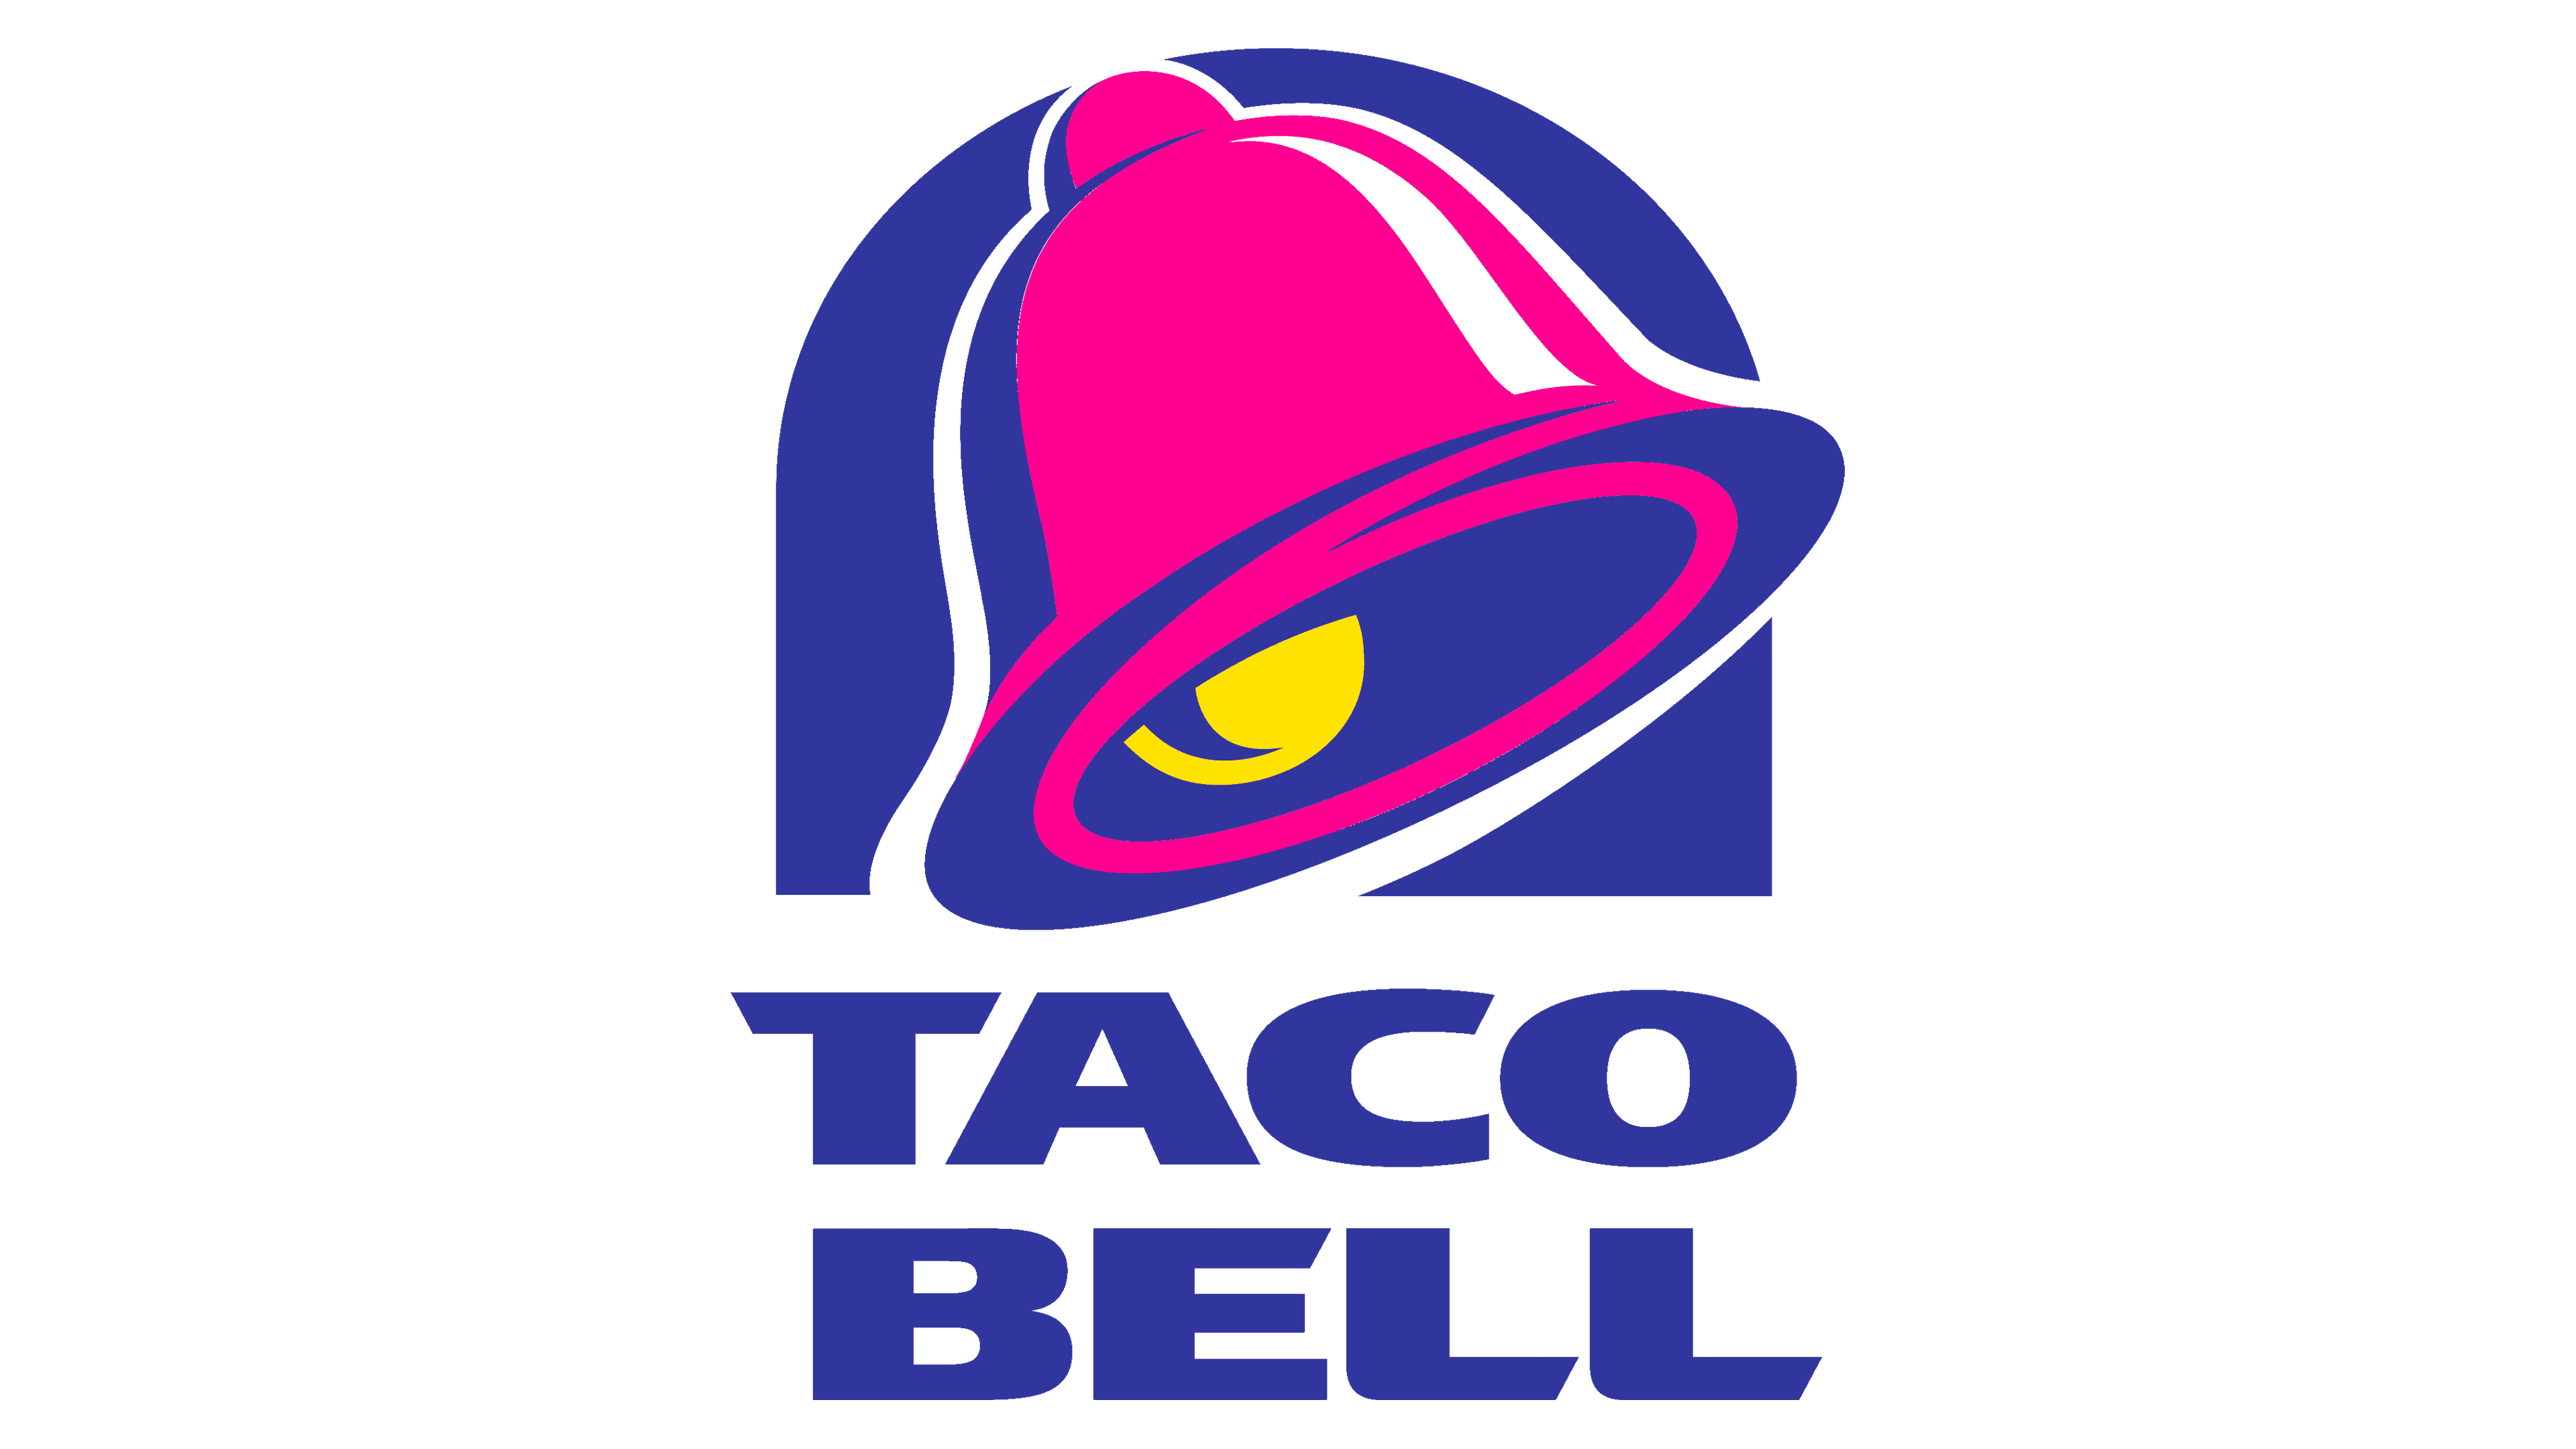 Taco Bell uniform made proudly 